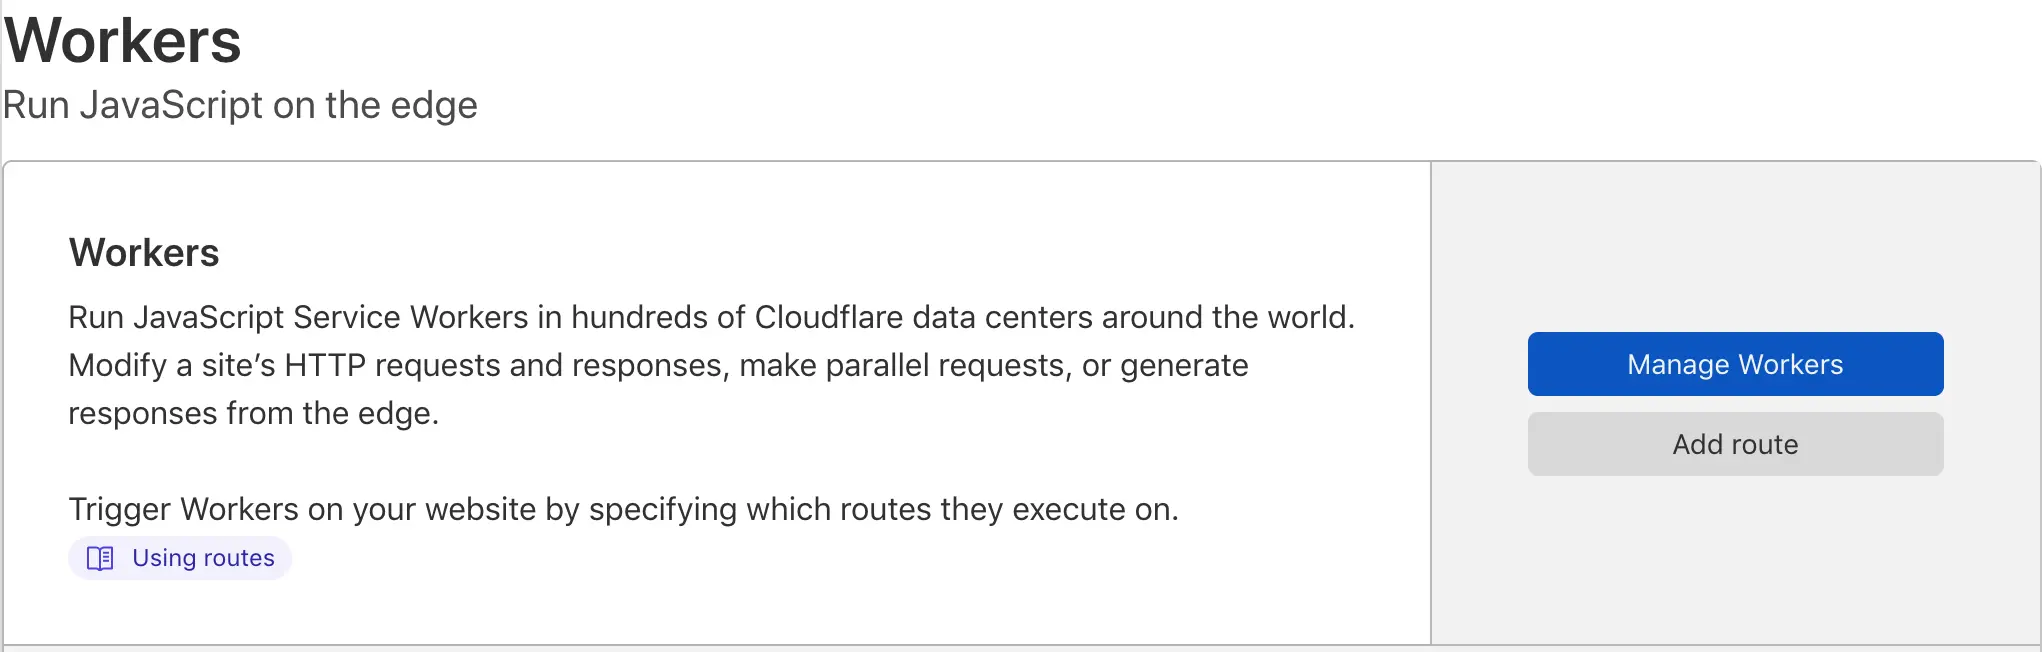 Cloudflare workers add route